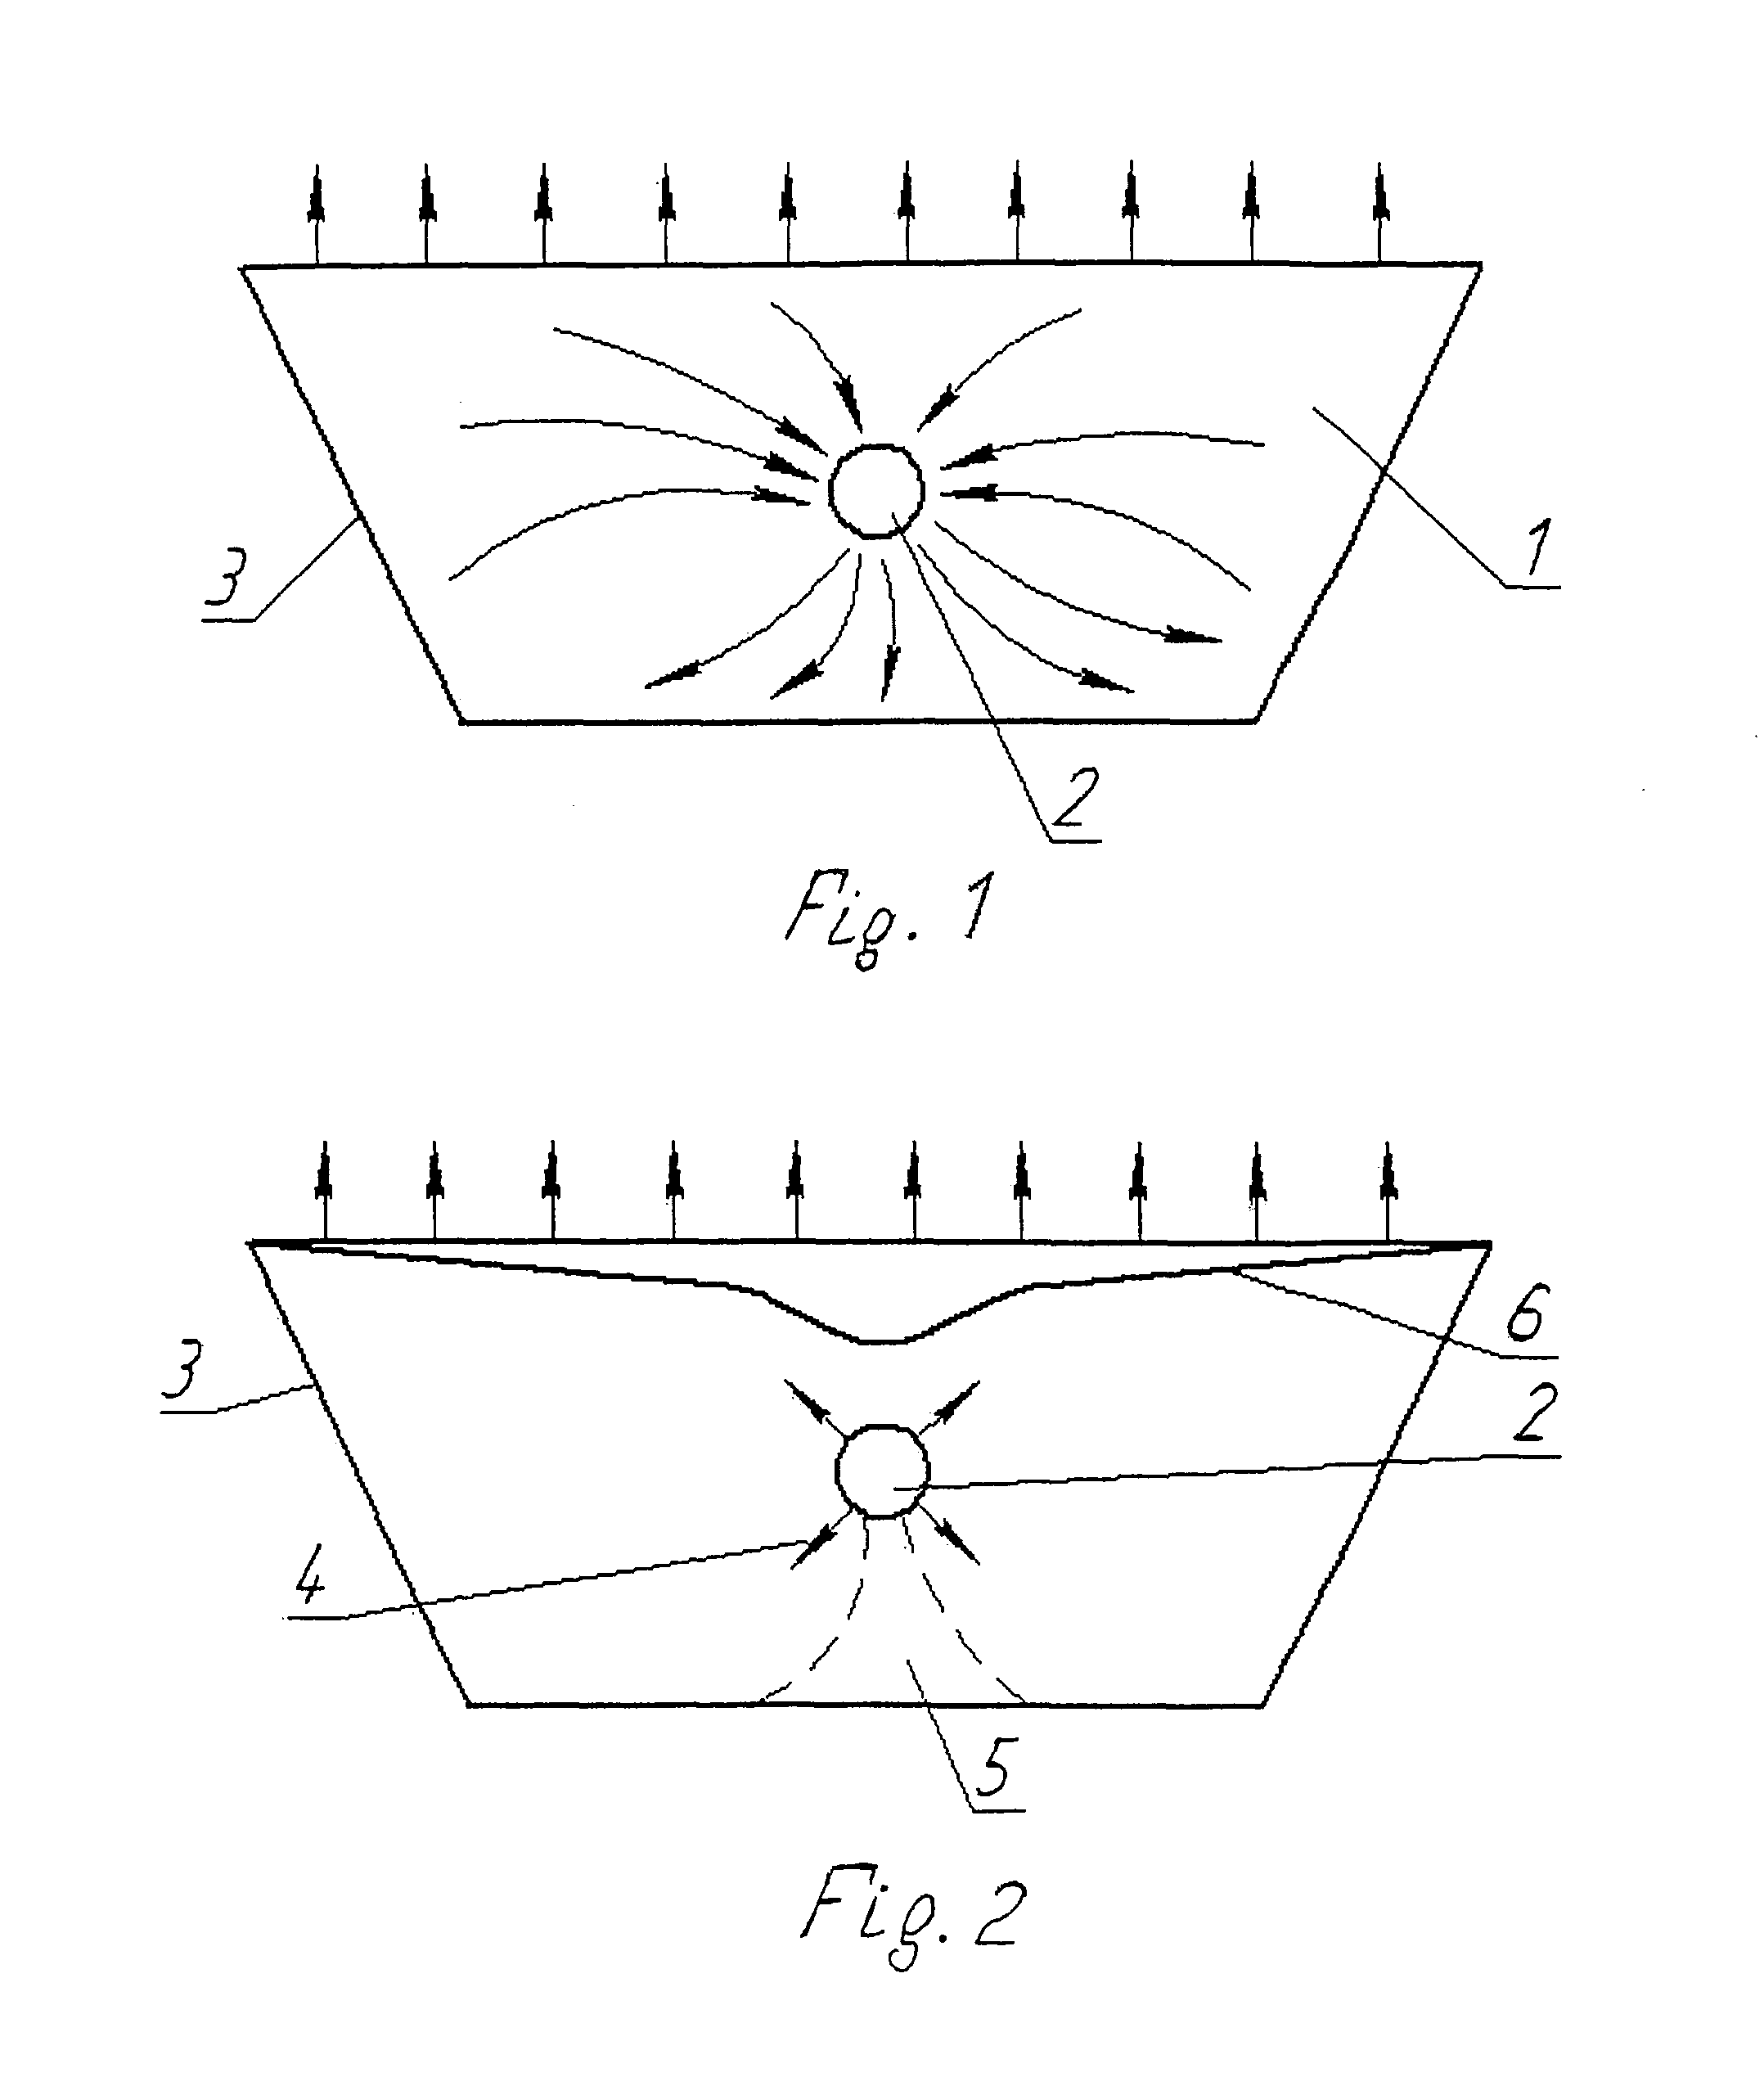 Method for making castings by directed solidification from a selected point of melt toward casting periphery